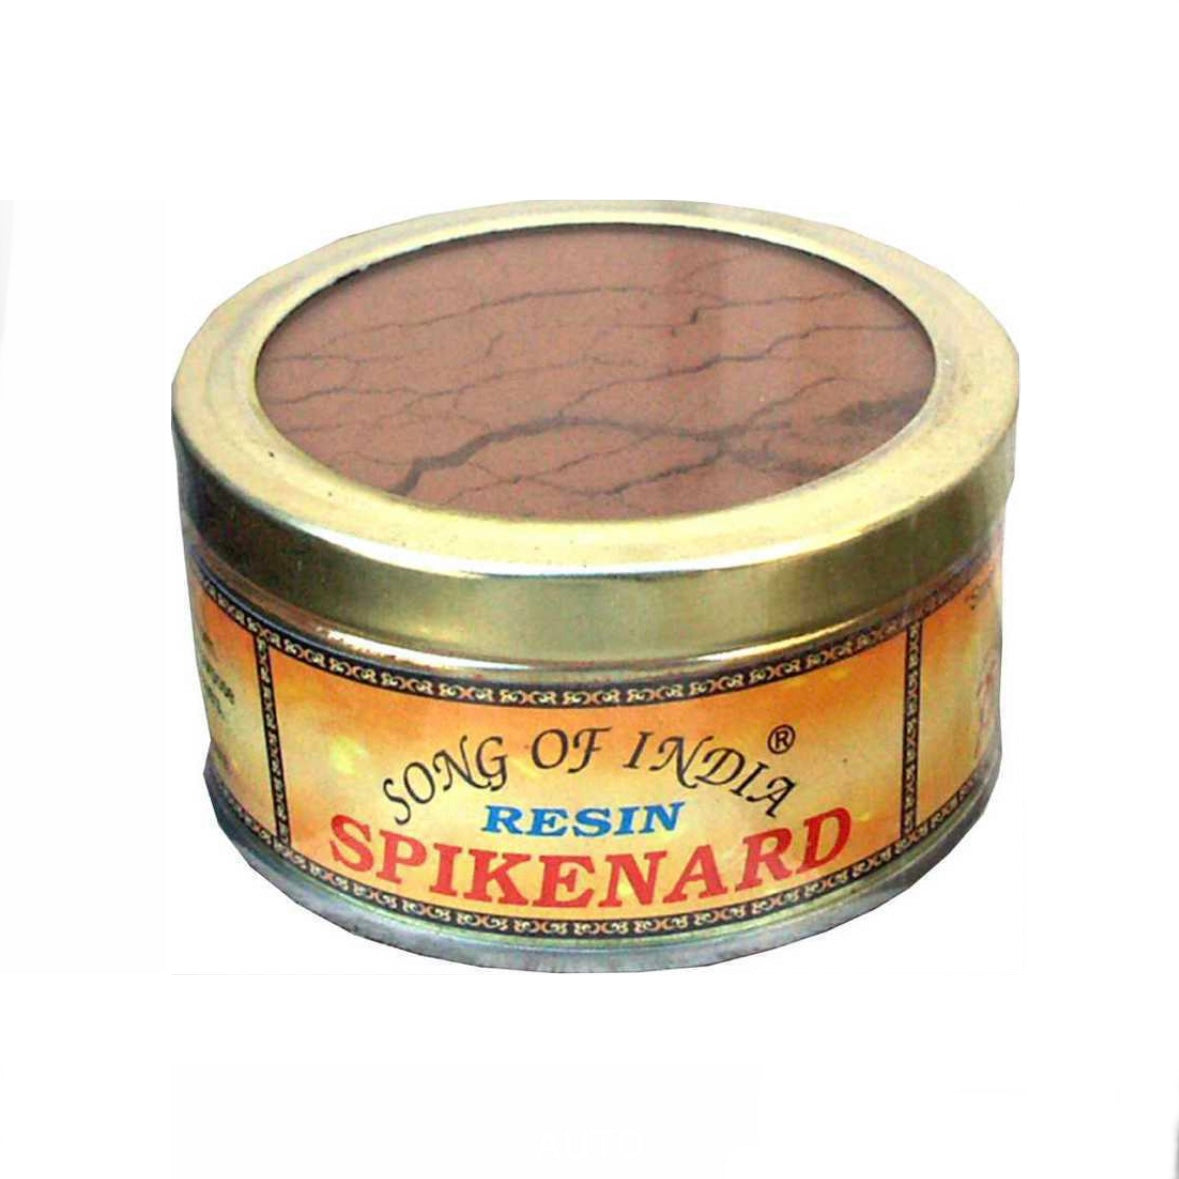 Song of India Spikenard Incenso in Resina 100% Naturale - 30g